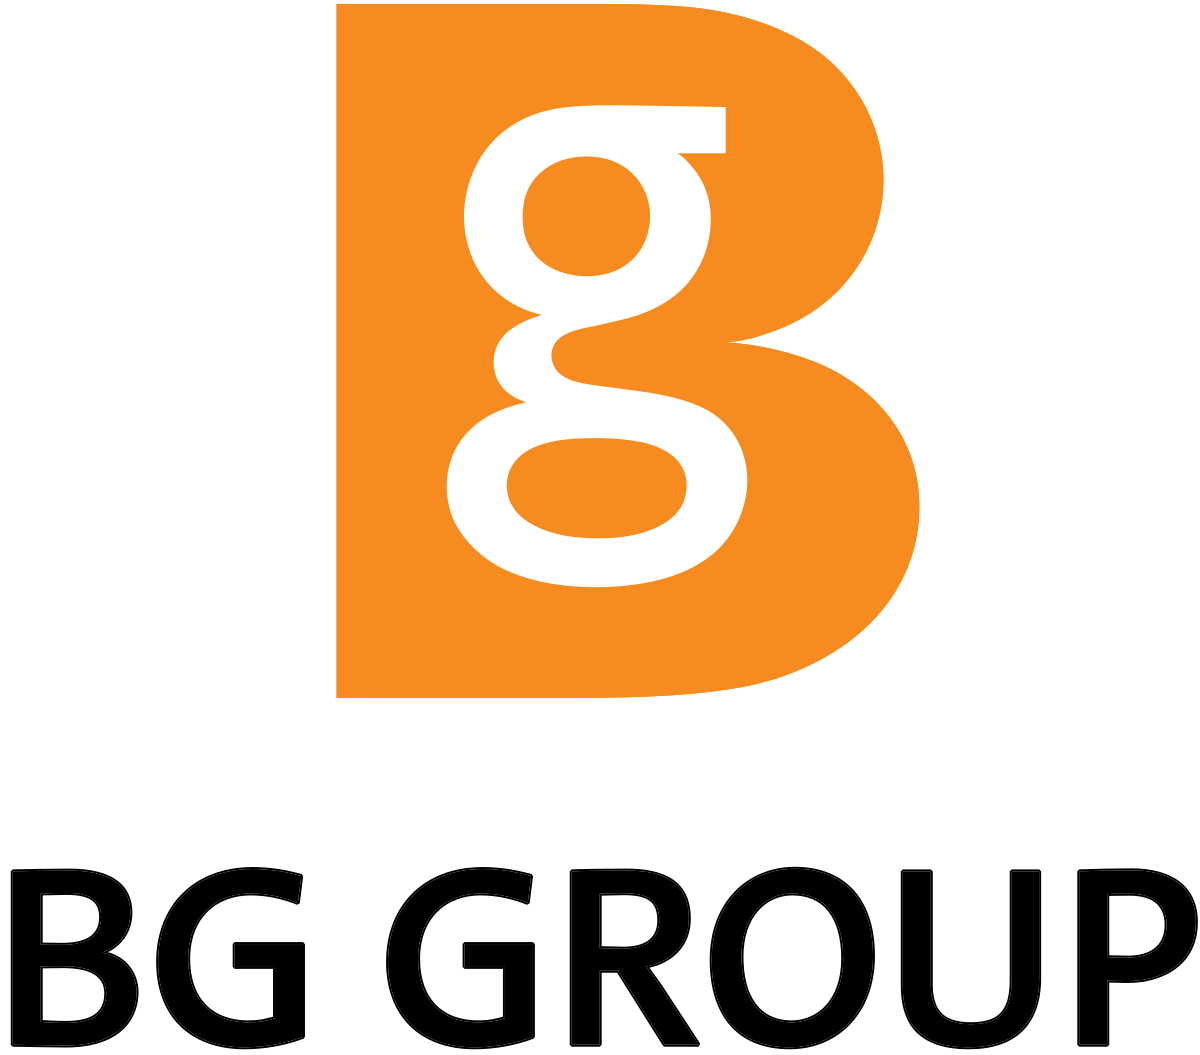 BG Products, Inc. – BG provides high quality products and